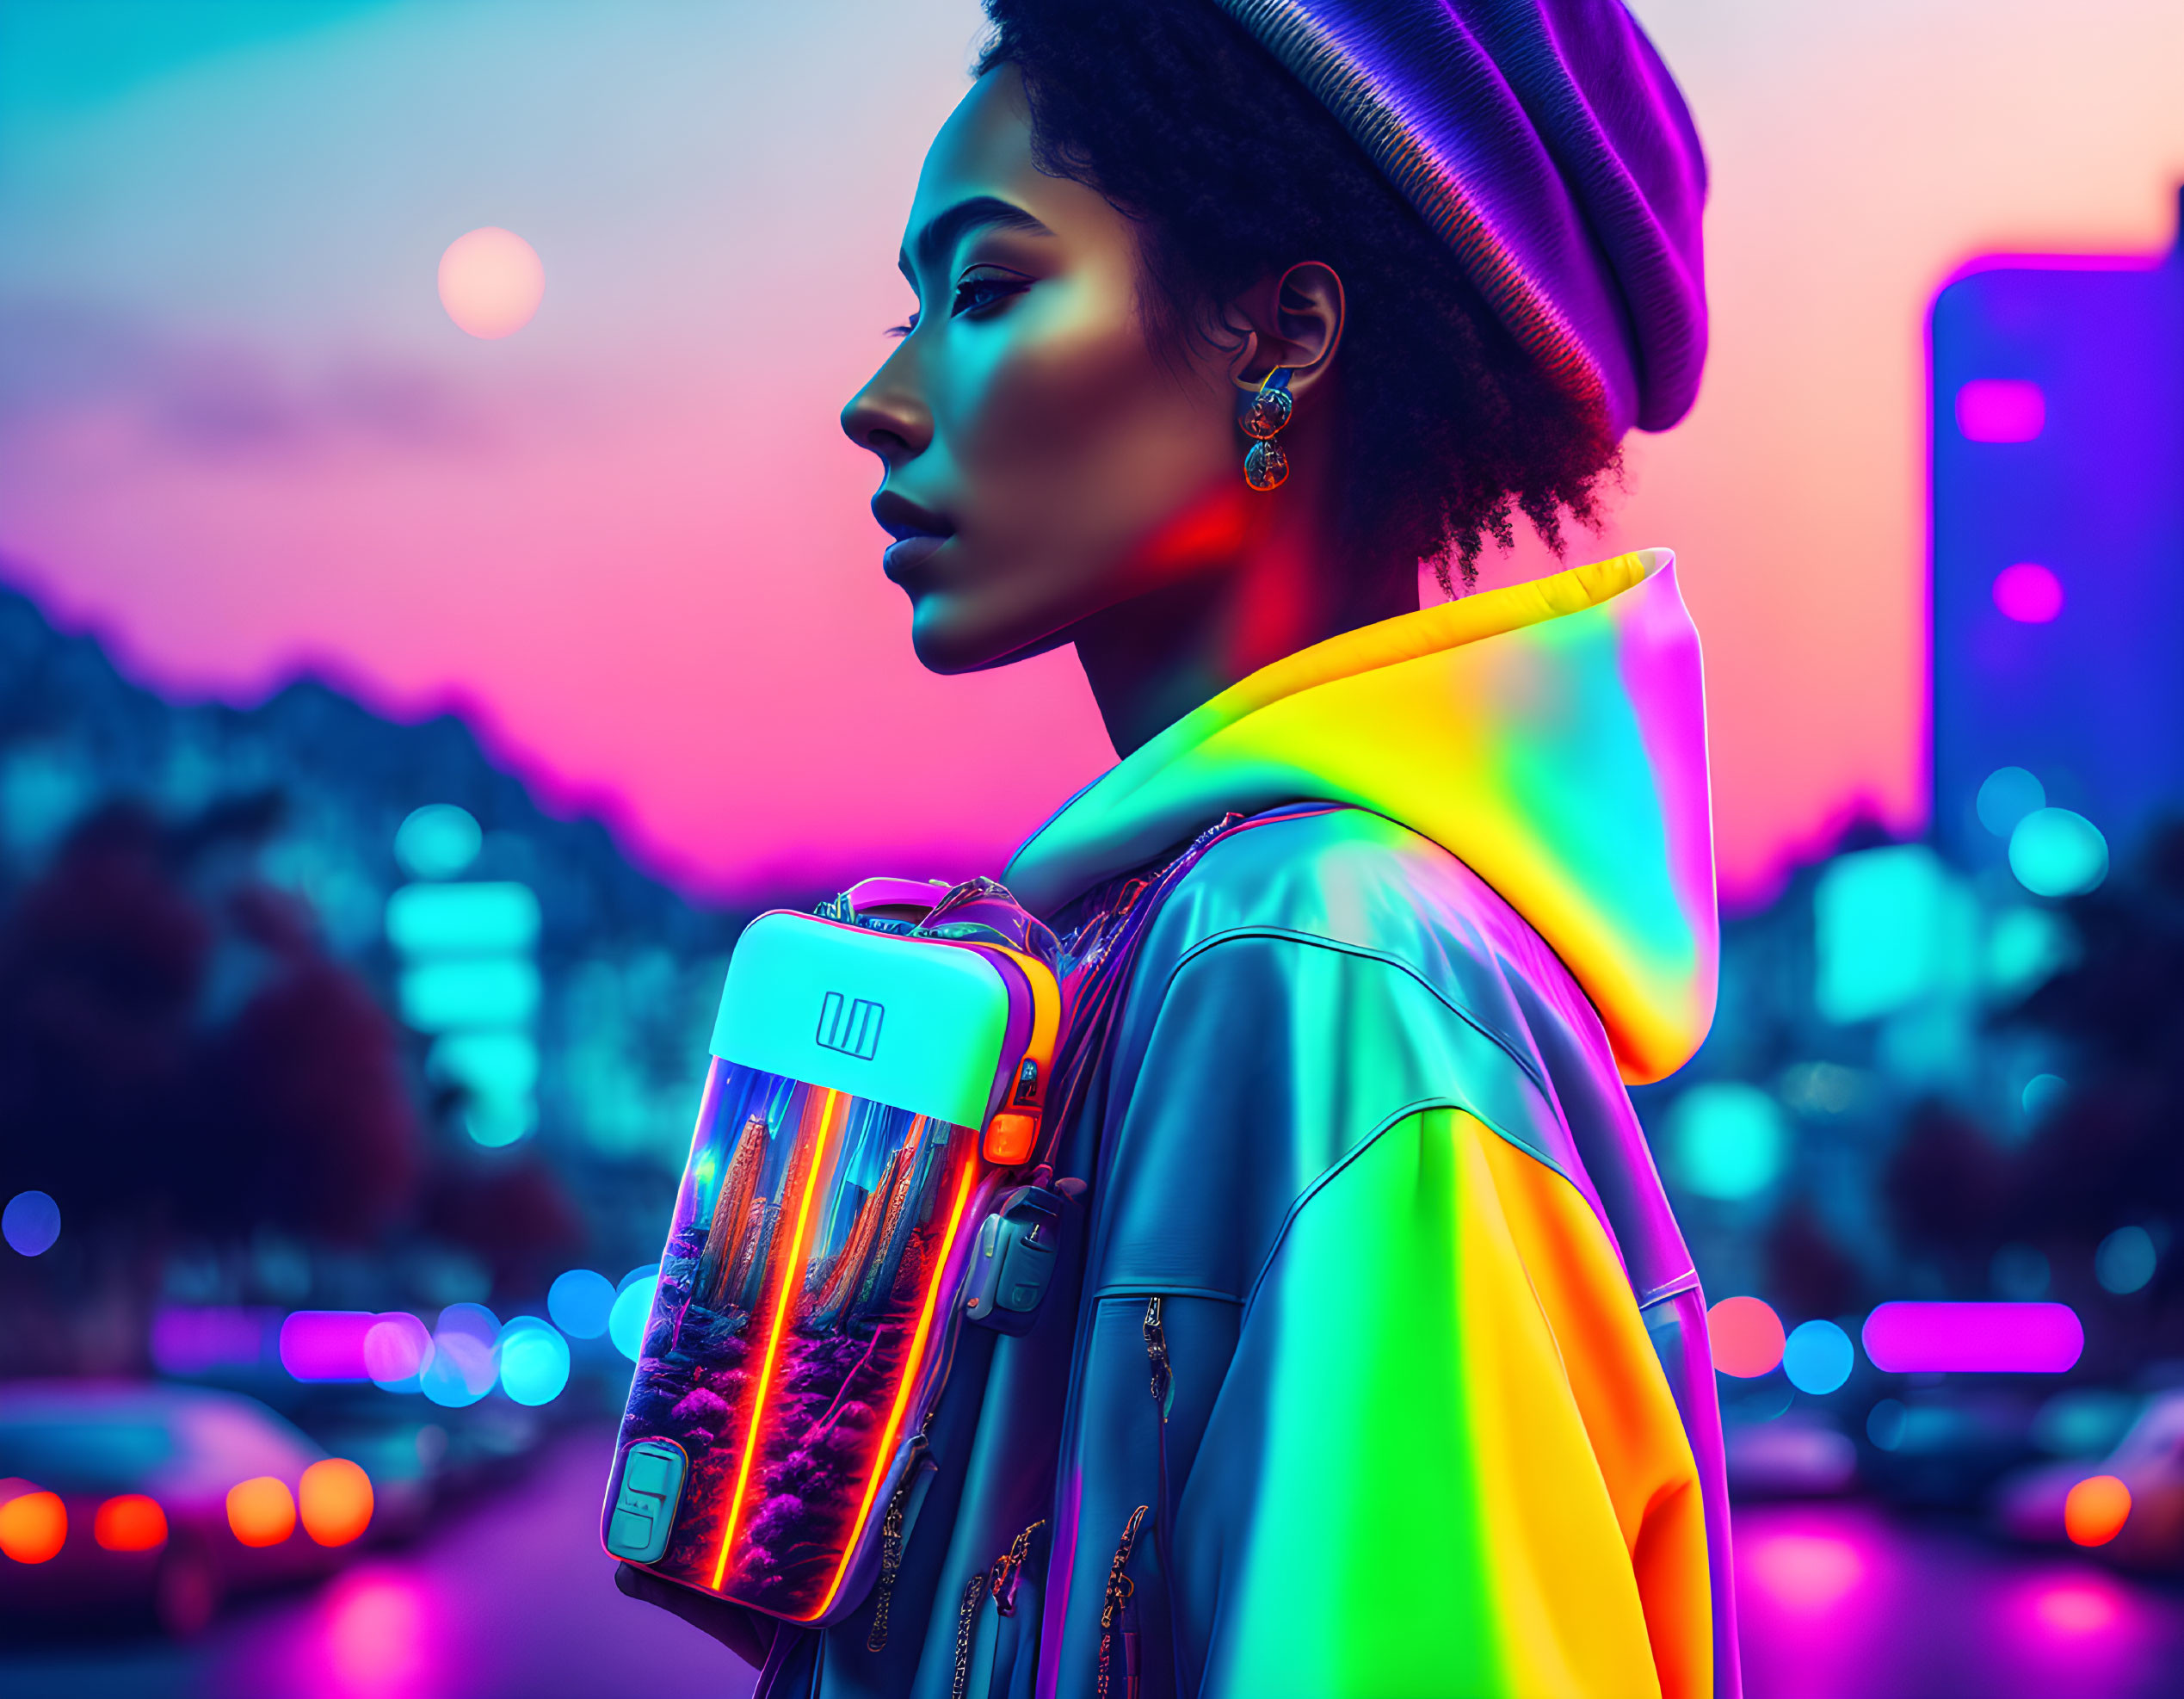 Stylish Woman with Transparent Backpack in Neon City Lights